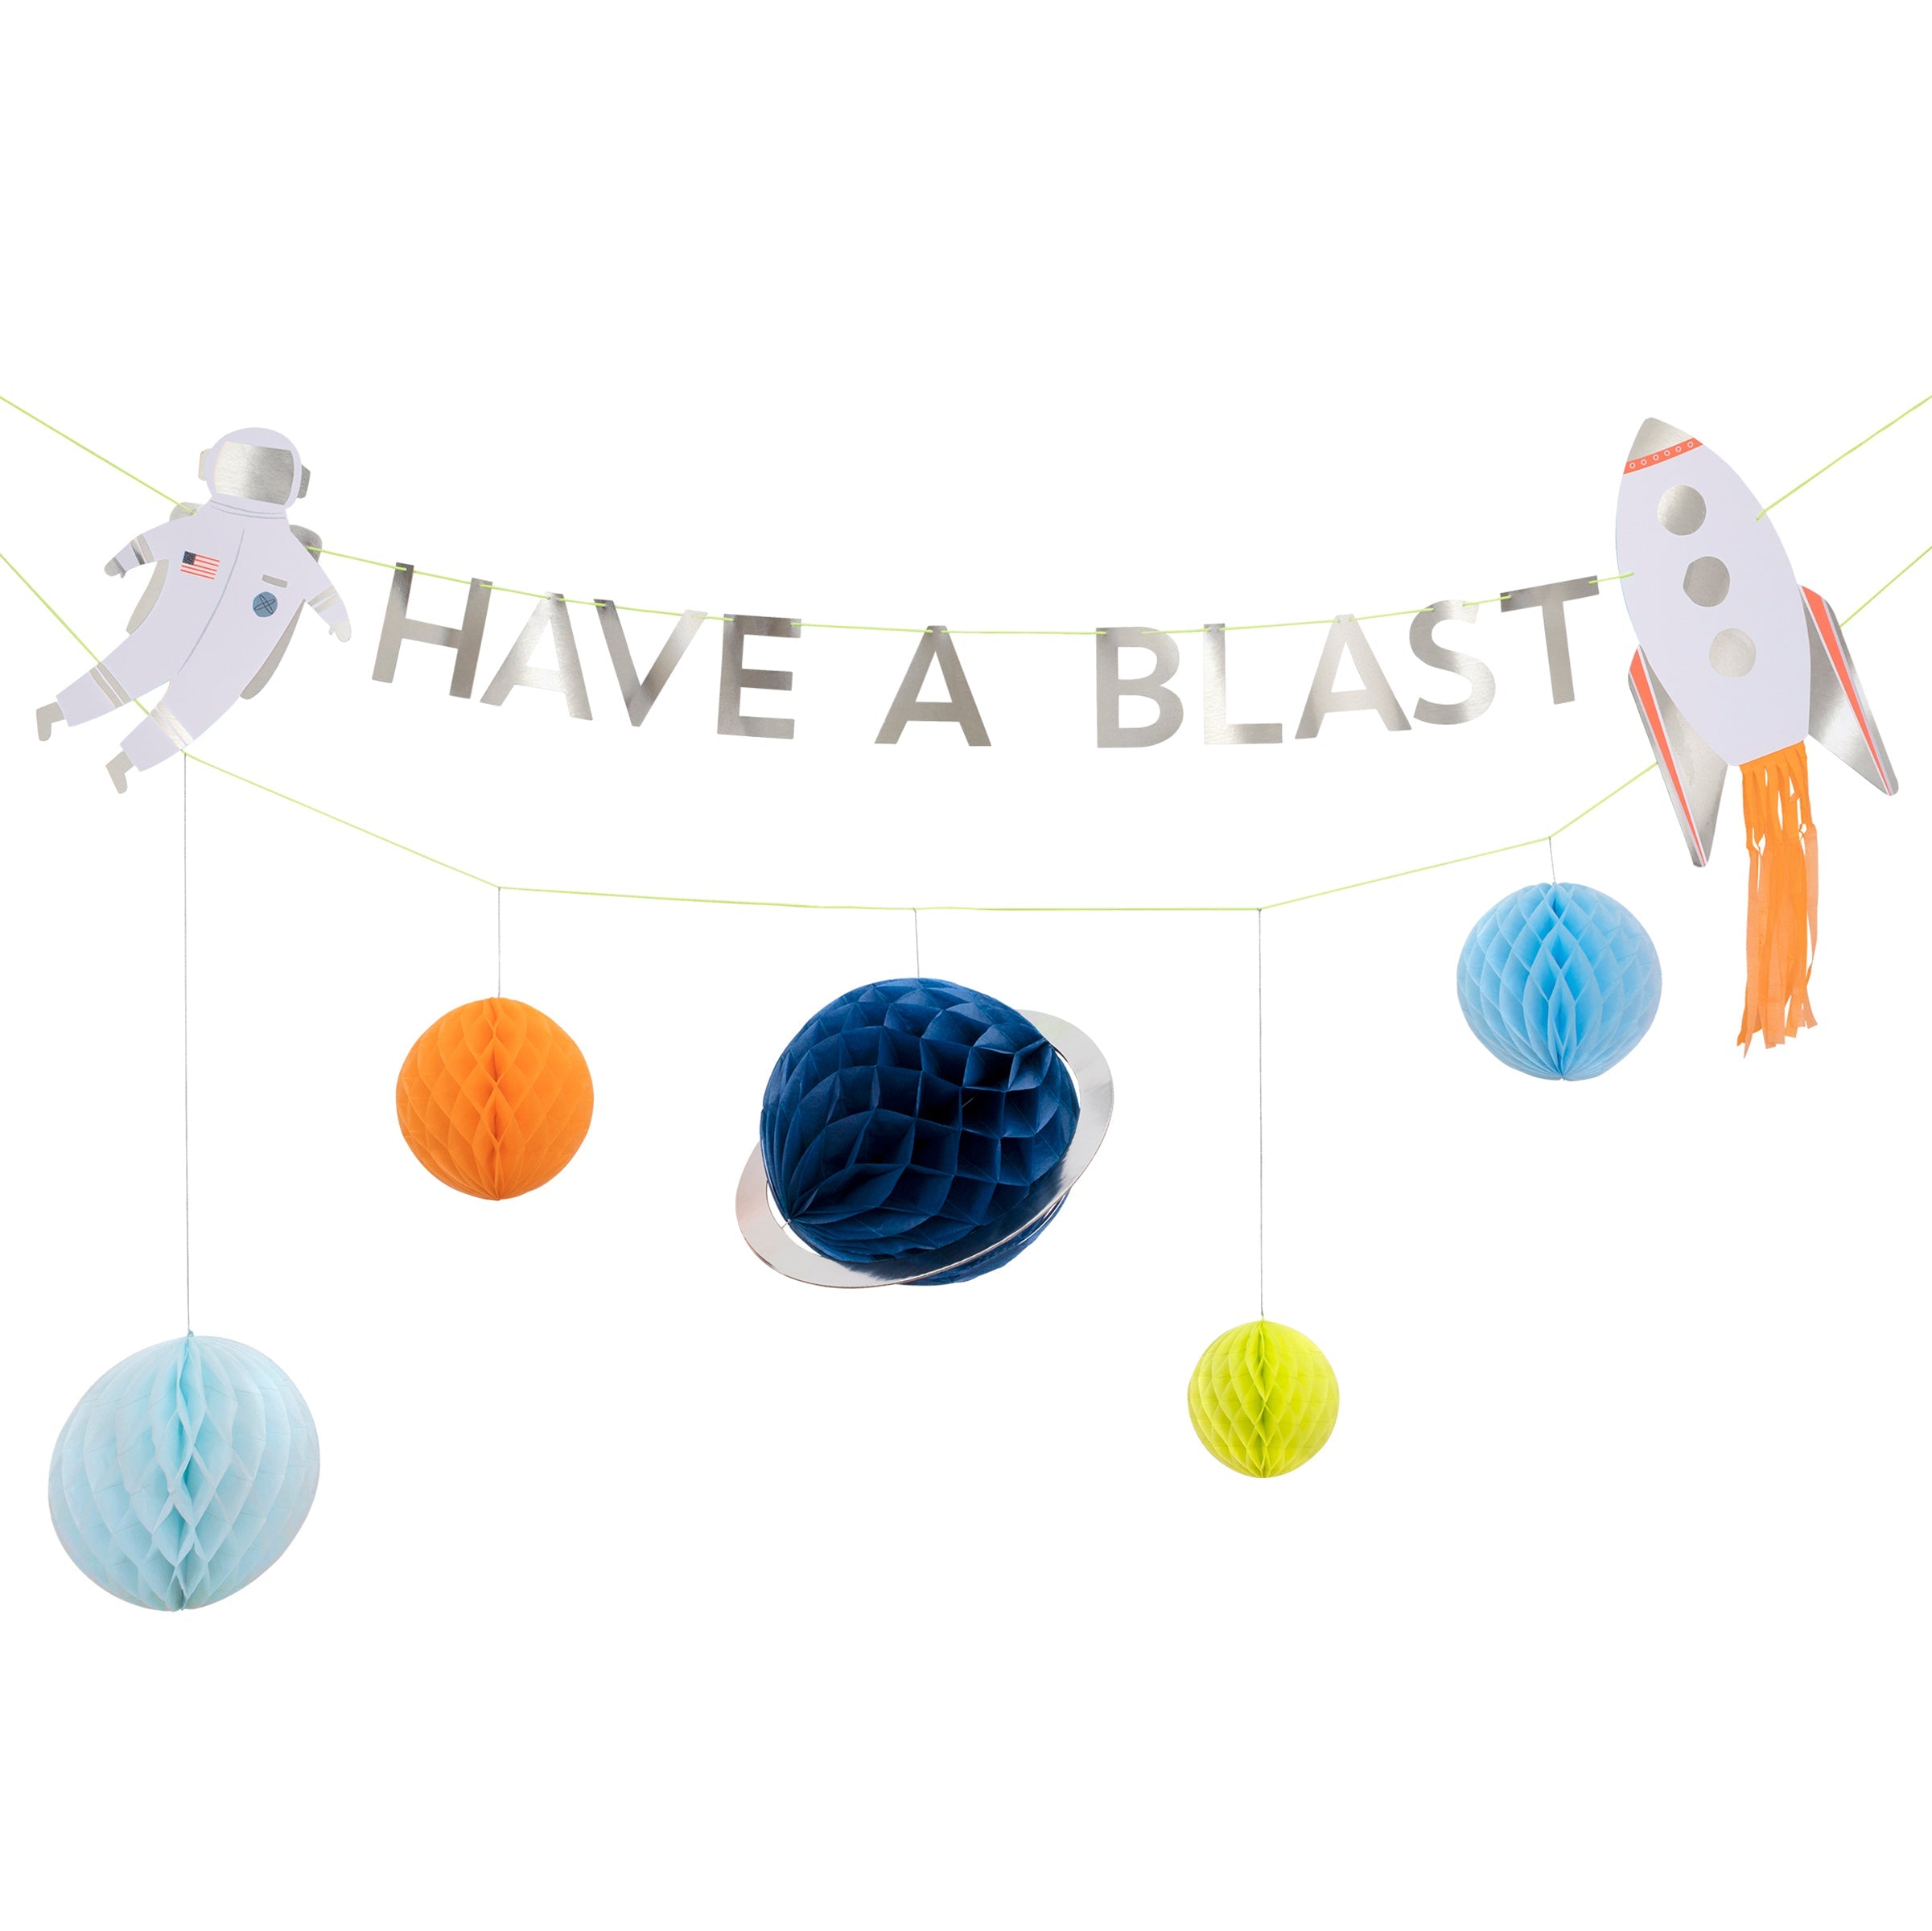 Our space party supplies are perfect for a space birthday party.